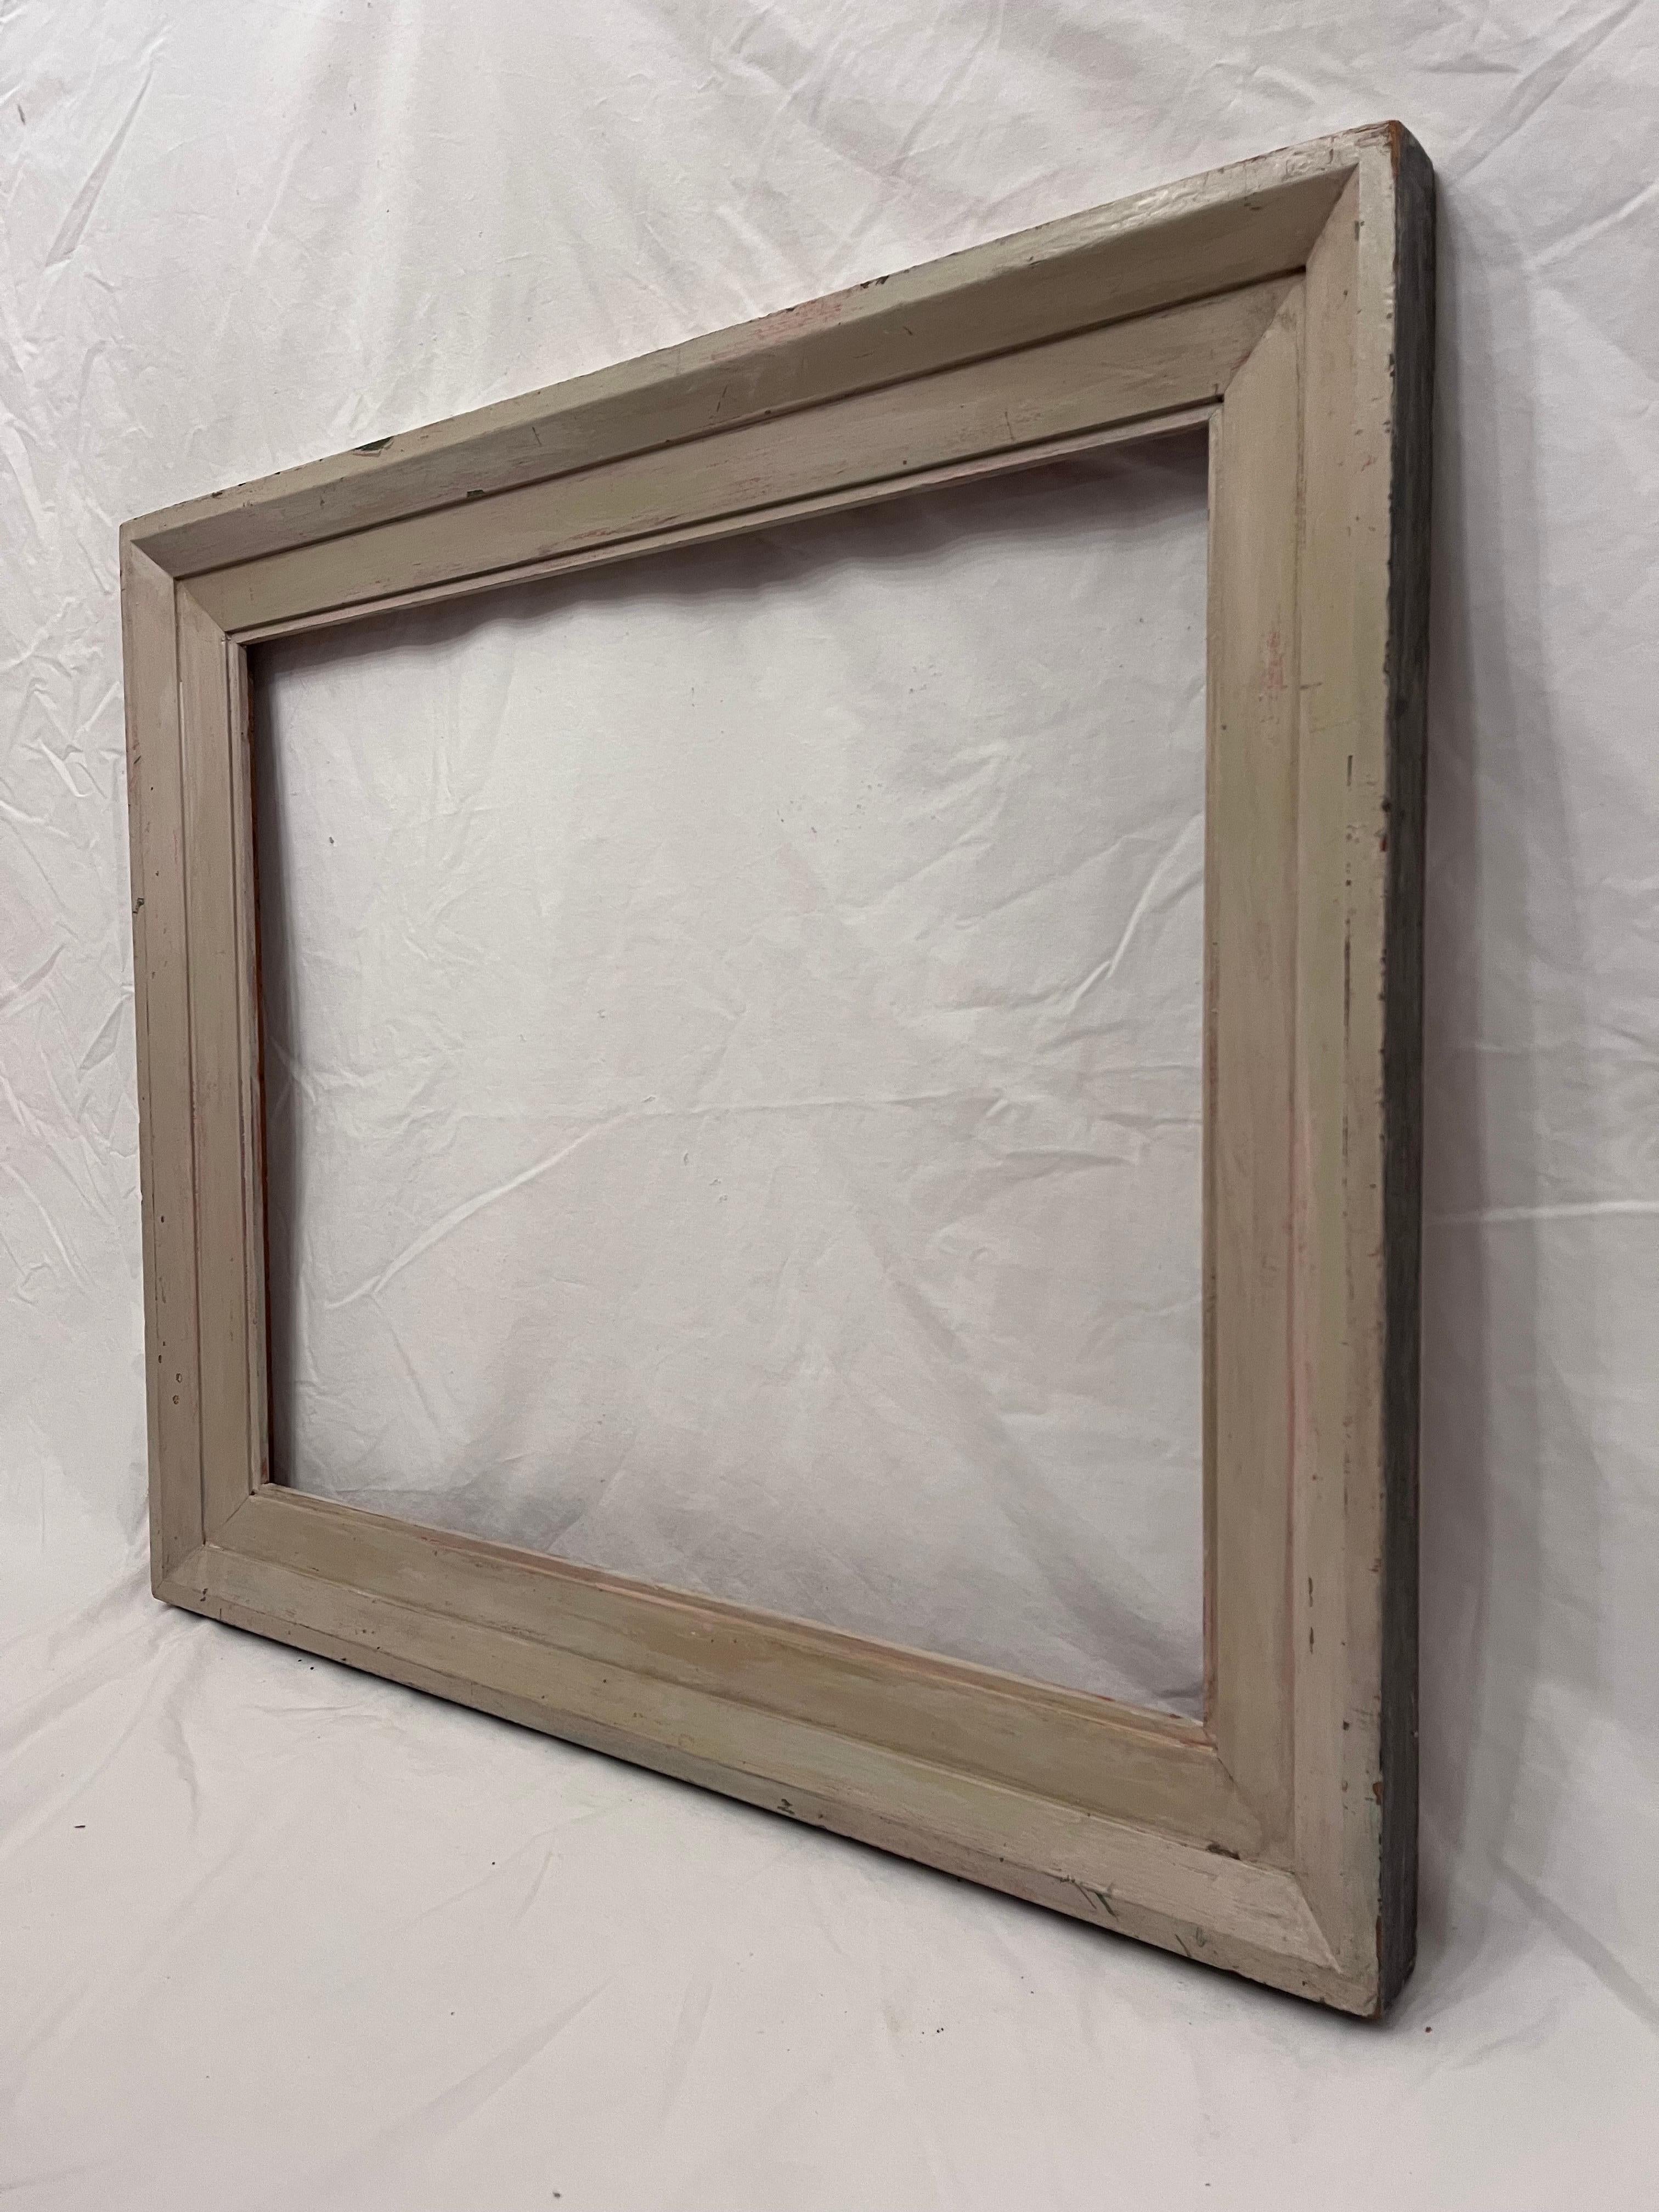 A beautiful and clean lined mid 20th century circa 1940's American Modernist style picture frame. The rabbet size (size that holds the art) is 24.25